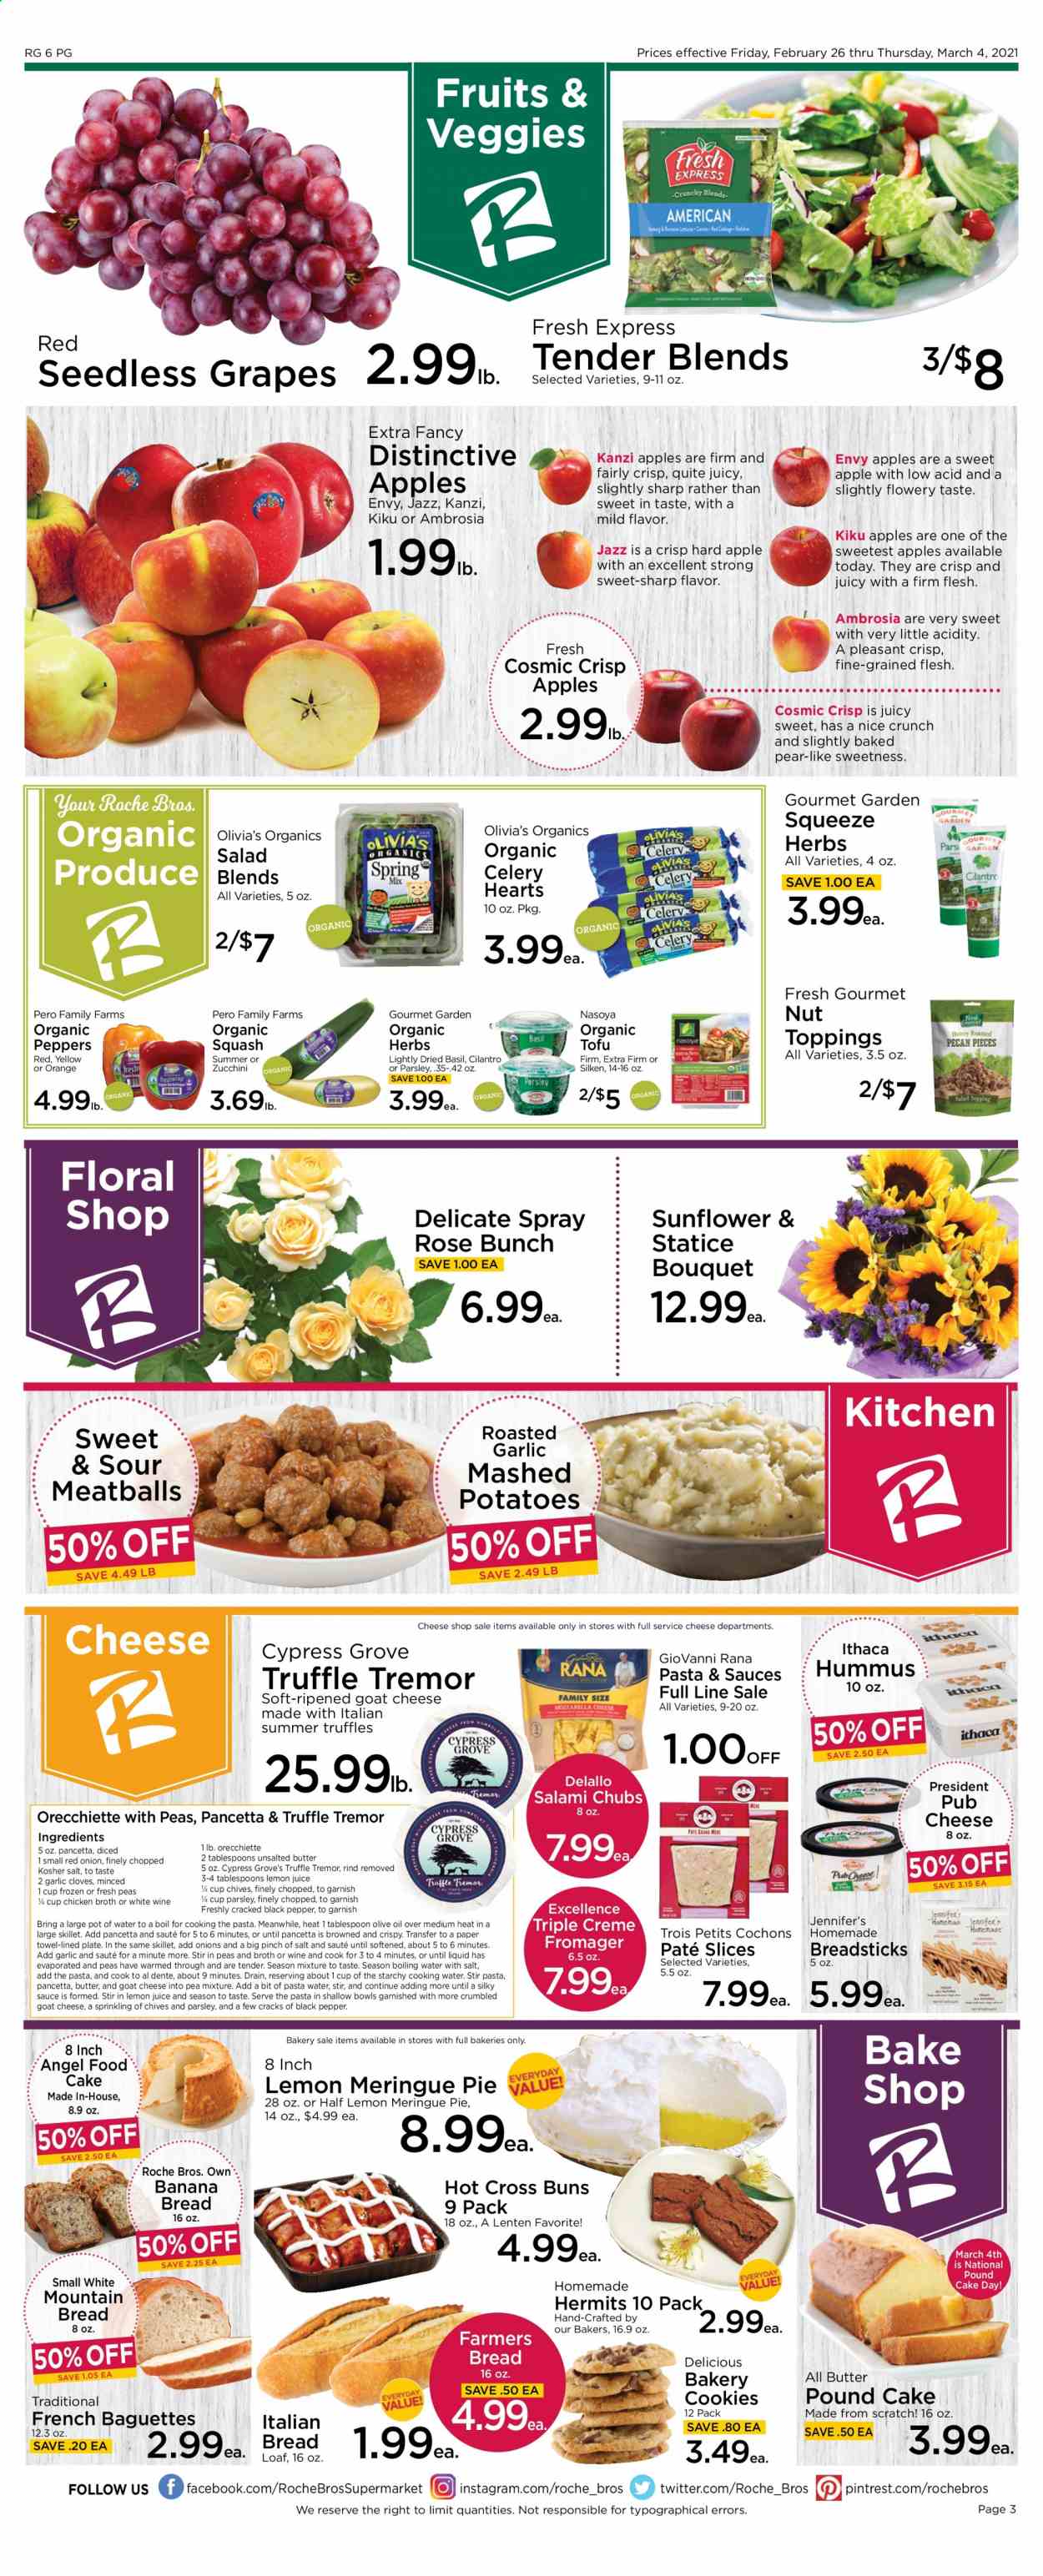 thumbnail - Roche Bros. Flyer - 02/26/2021 - 03/04/2021 - Sales products - celery, zucchini, seedless grapes, baguette, bread, bread sticks, cake, pie, Angel Food, banana bread, buns, pound cake, apples, pears, oranges, mashed potatoes, meatballs, salad, Giovanni Rana, salami, pancetta, hummus, goat cheese, cheese, pub cheese, Président, tofu, butter, peas, cookies, truffles, chicken broth, broth, pasta, Rana, esponja, cilantro, parsley, black pepper, cloves, herbs, olive oil, white wine, paper towels, Bakers, sunflower, bouquet, rose, grapes. Page 3.